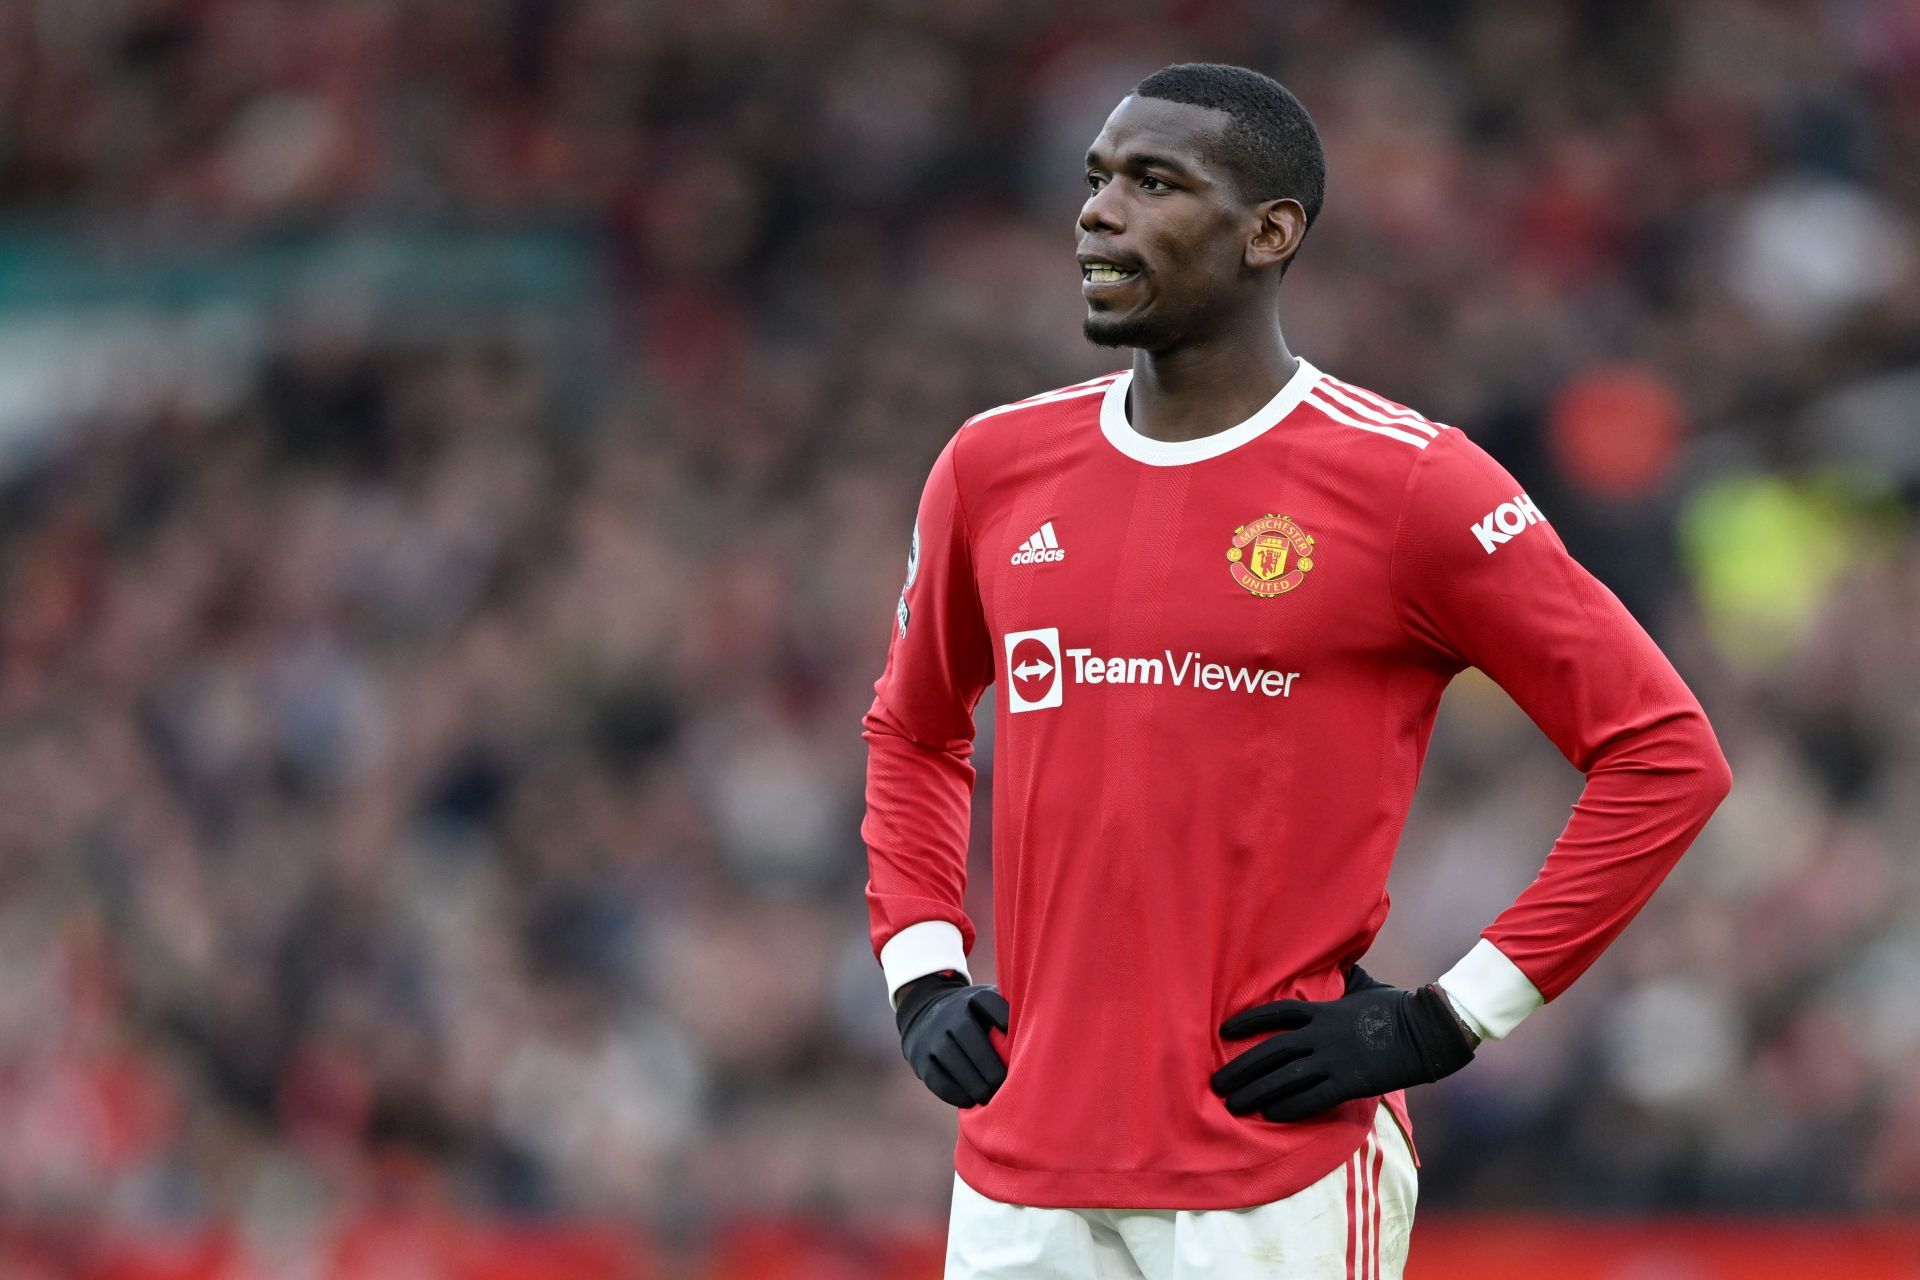 Paul Pogba was constantly criticized during his time at Manchester United.